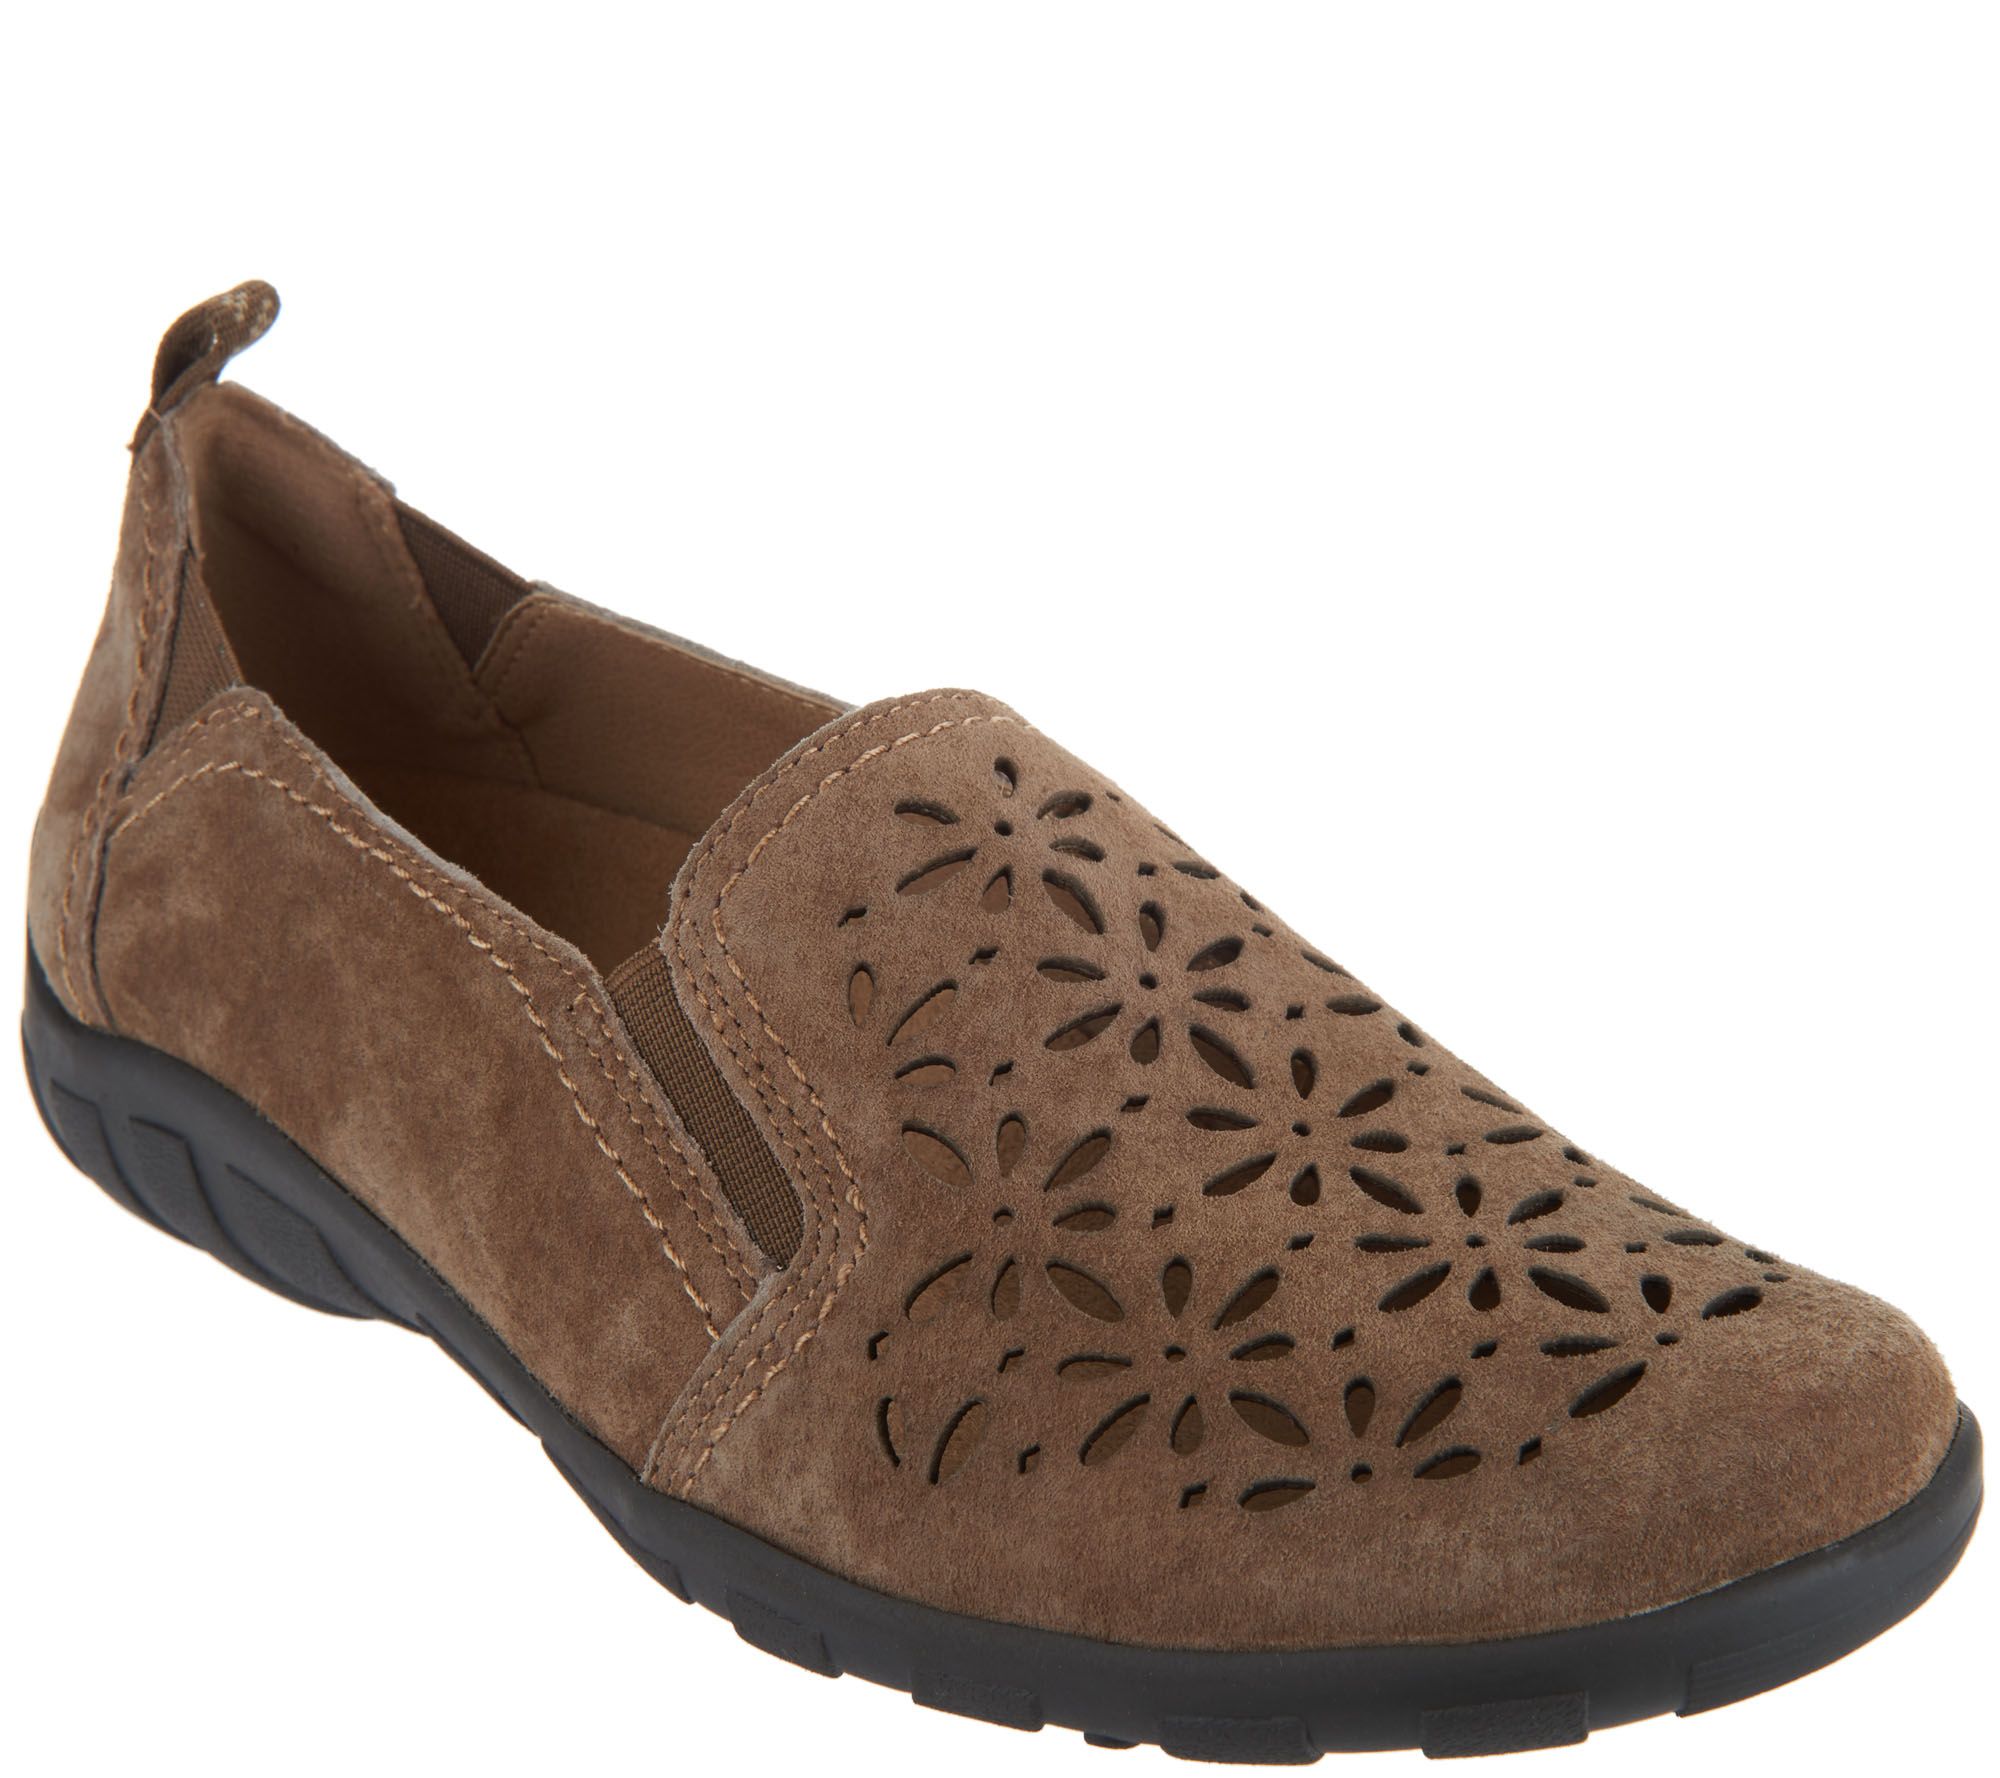 Earth Origins Suede Perforated Slip-on Shoes - Rikki - Page 1 — QVC.com